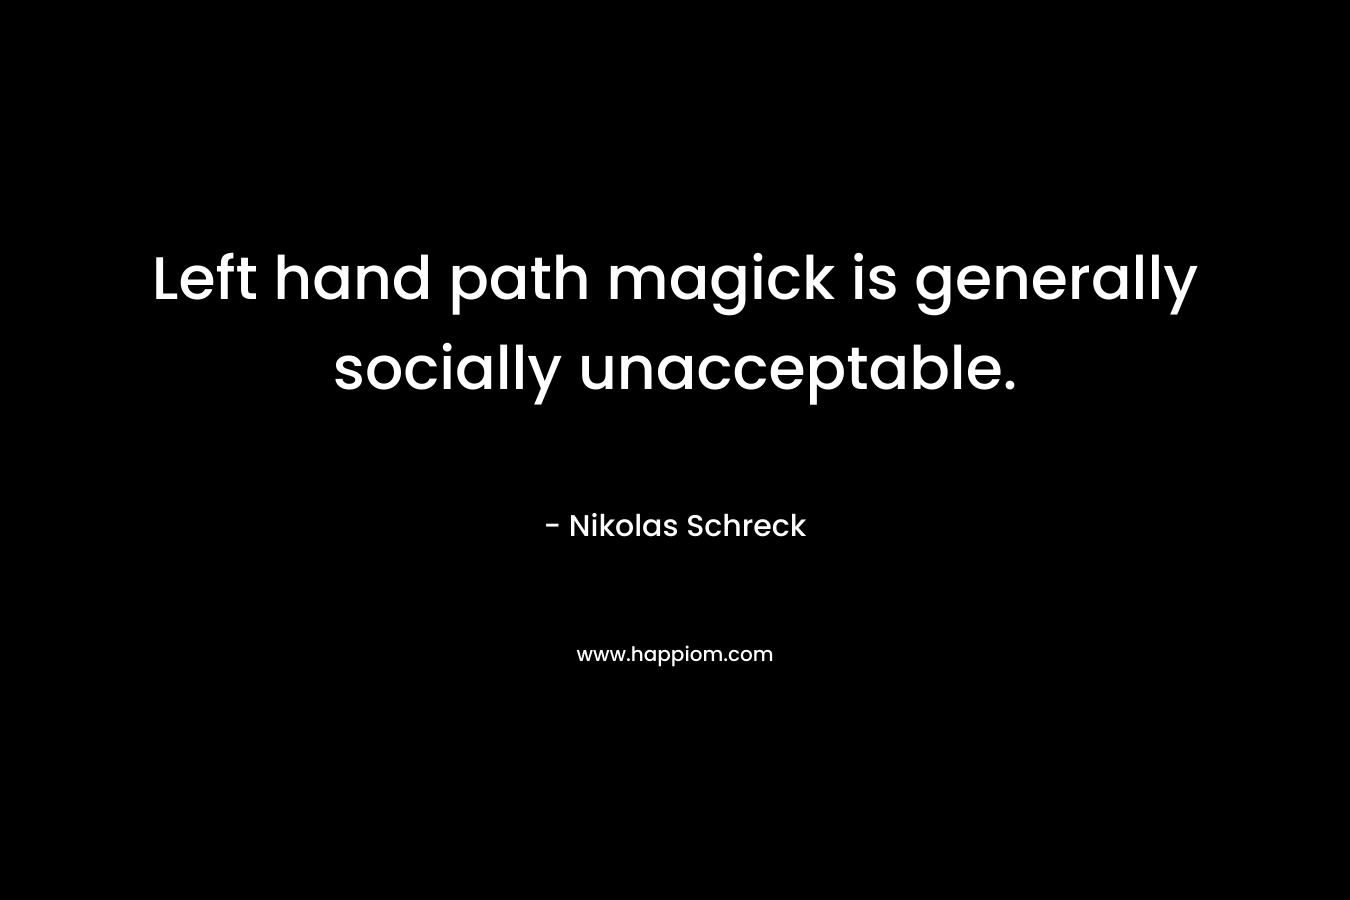 Left hand path magick is generally socially unacceptable.